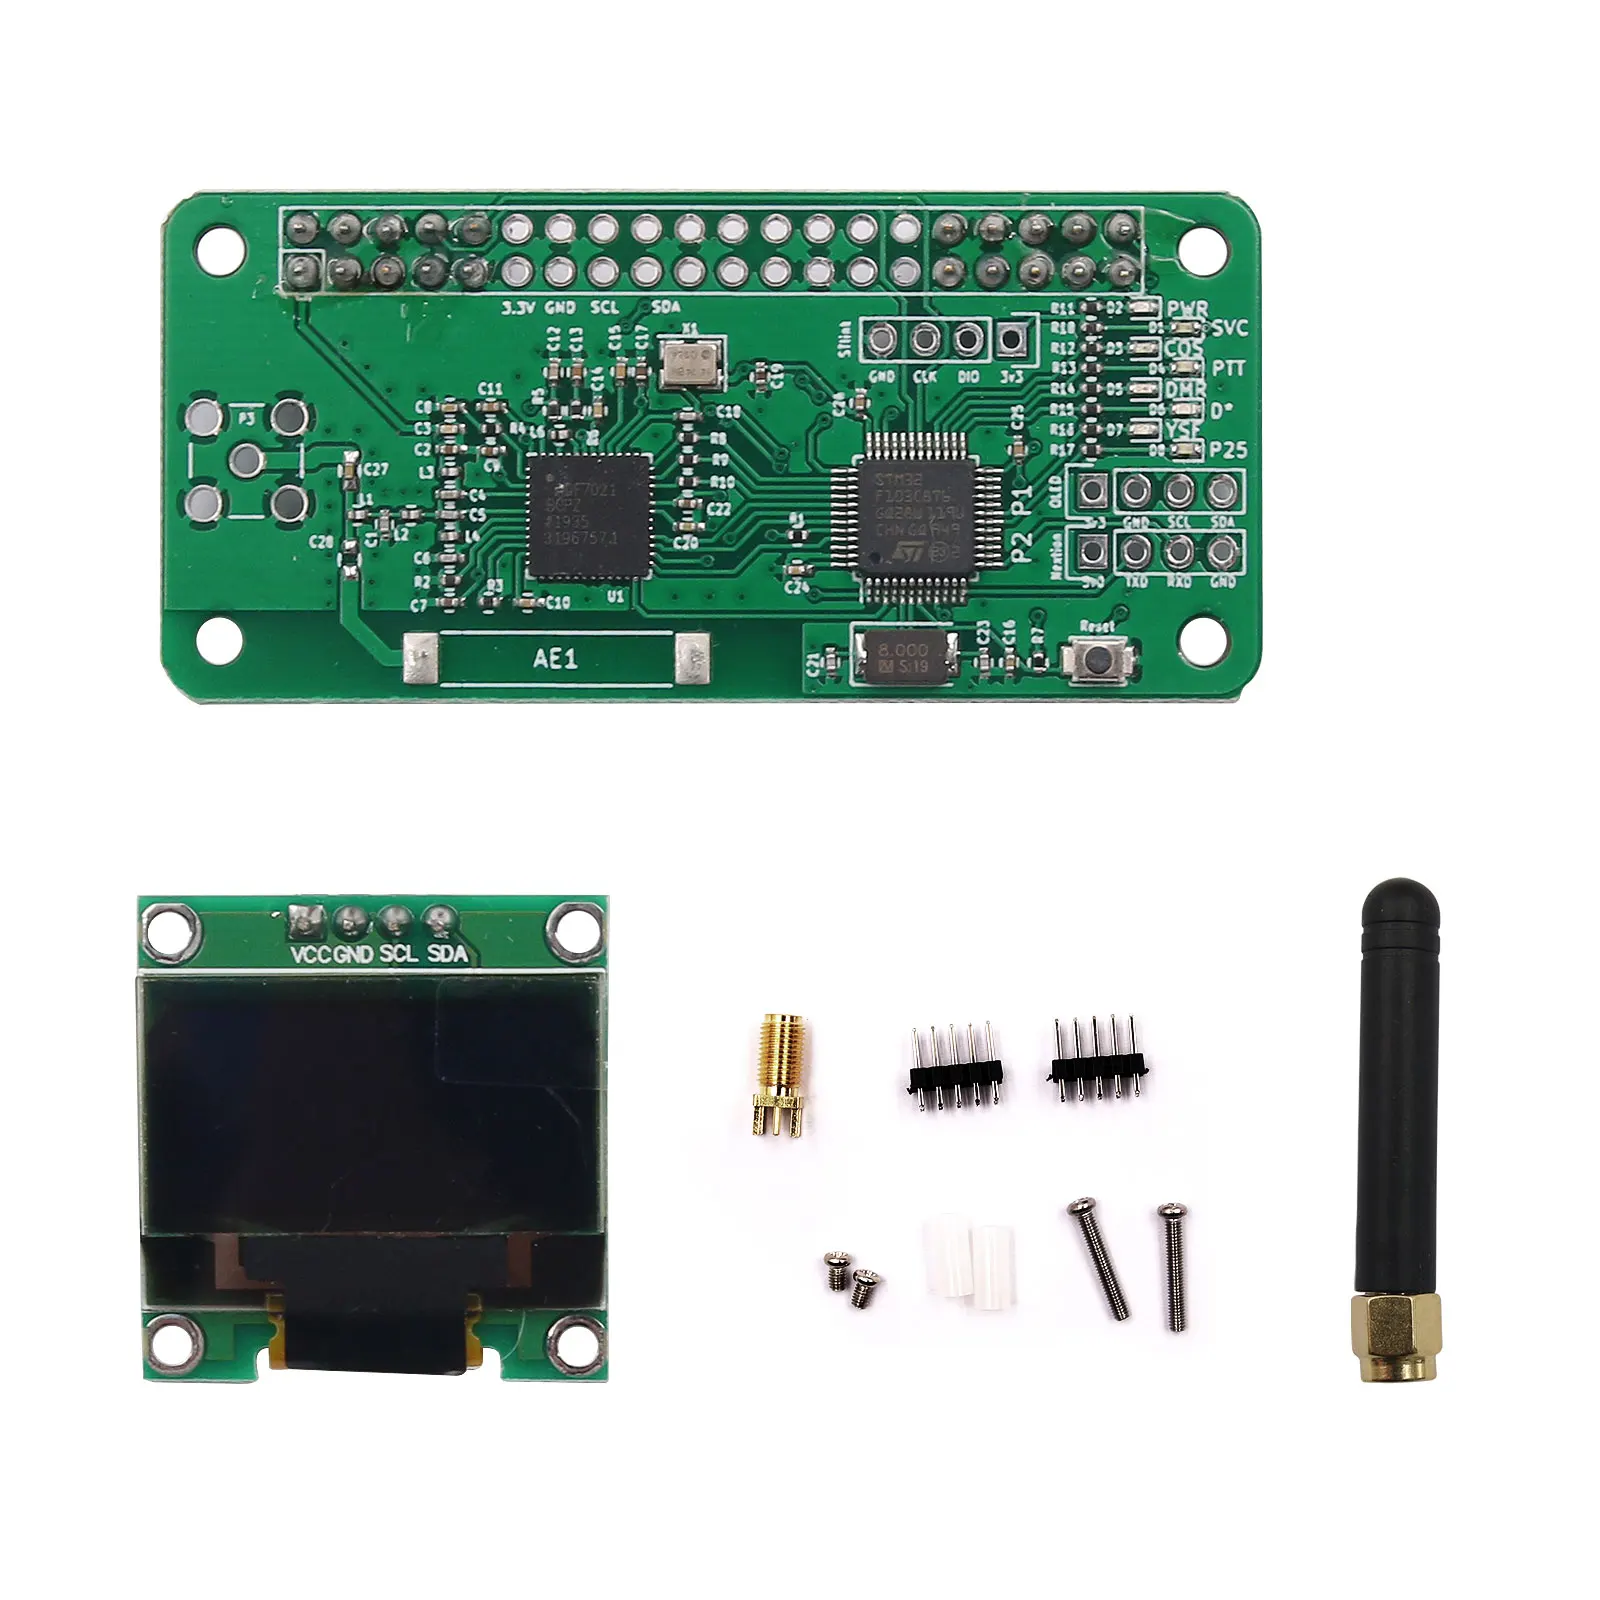 MMDVM Expansion Board Support P25 DMR YSF D-Star UHF VHF WiFi Digital Voice Modem Suitable for Raspberry Pi-Zero W Pi 3B+ Hima MMDVM Hotspot Spot Radio Station Antenna Pi 3 